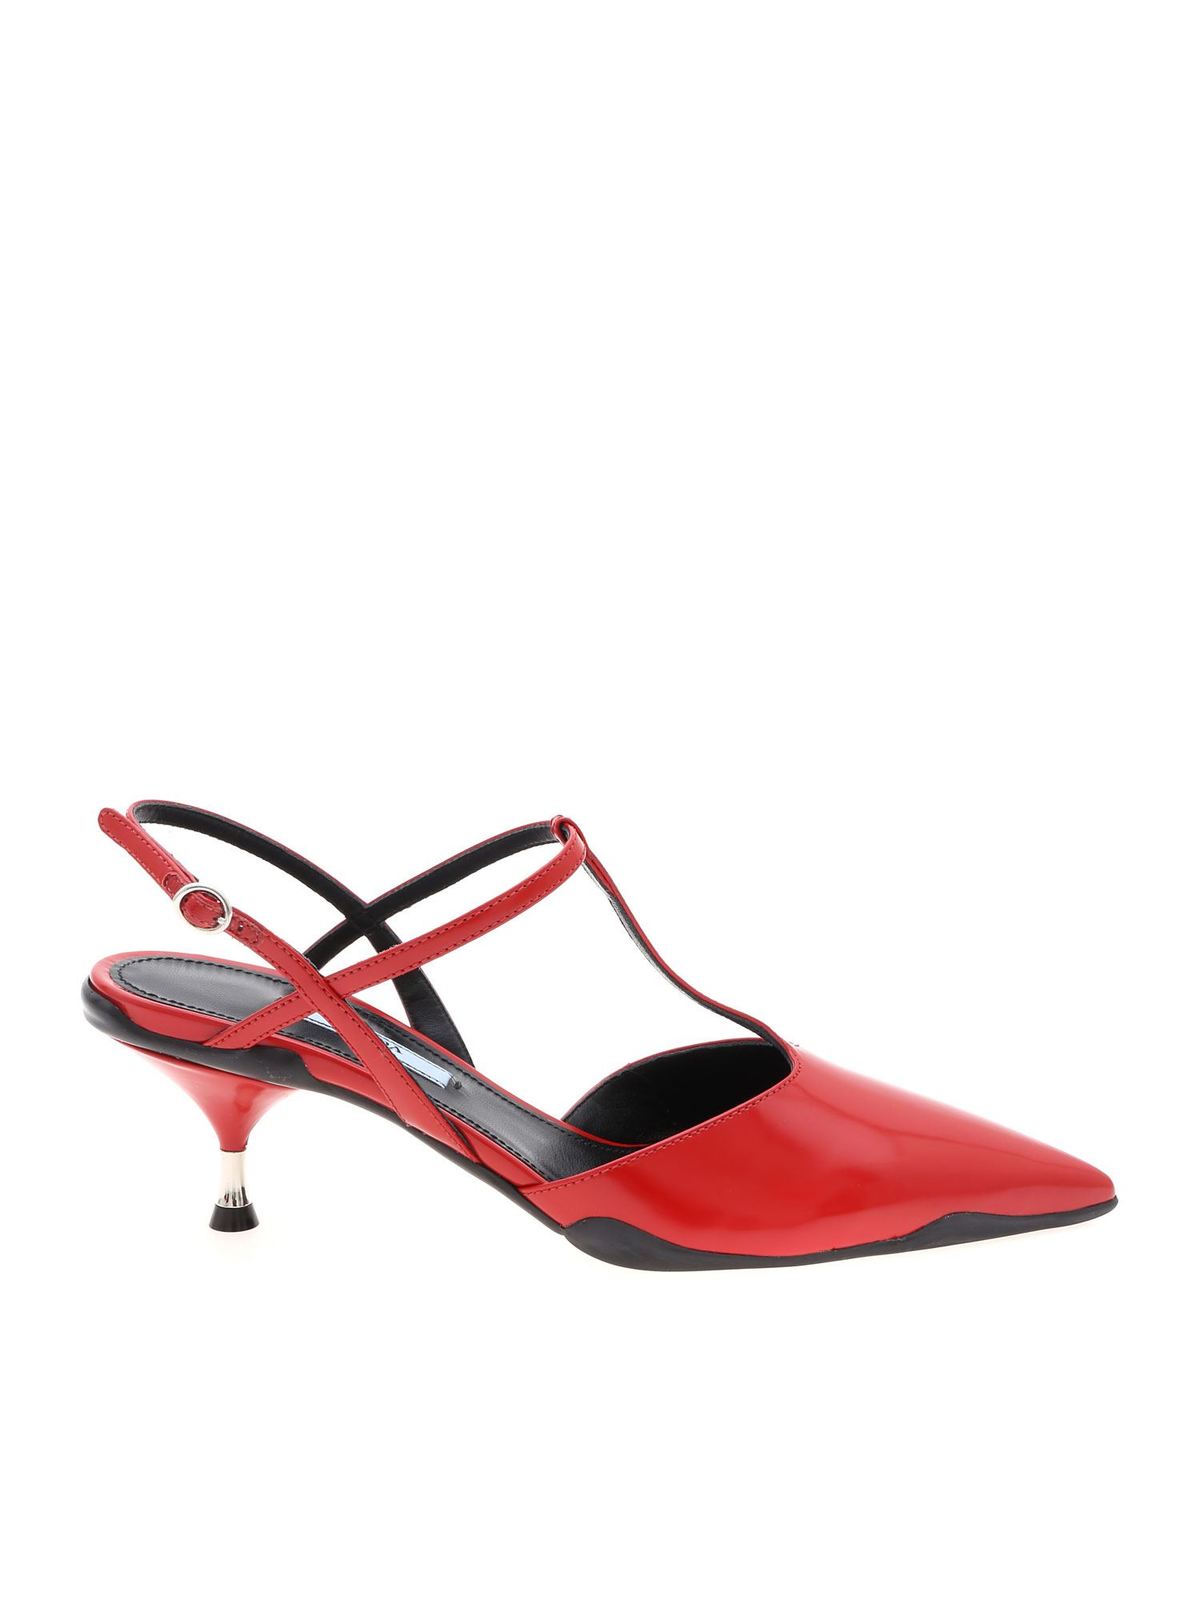 PRADA POINTY MULES IN RED LEATHER